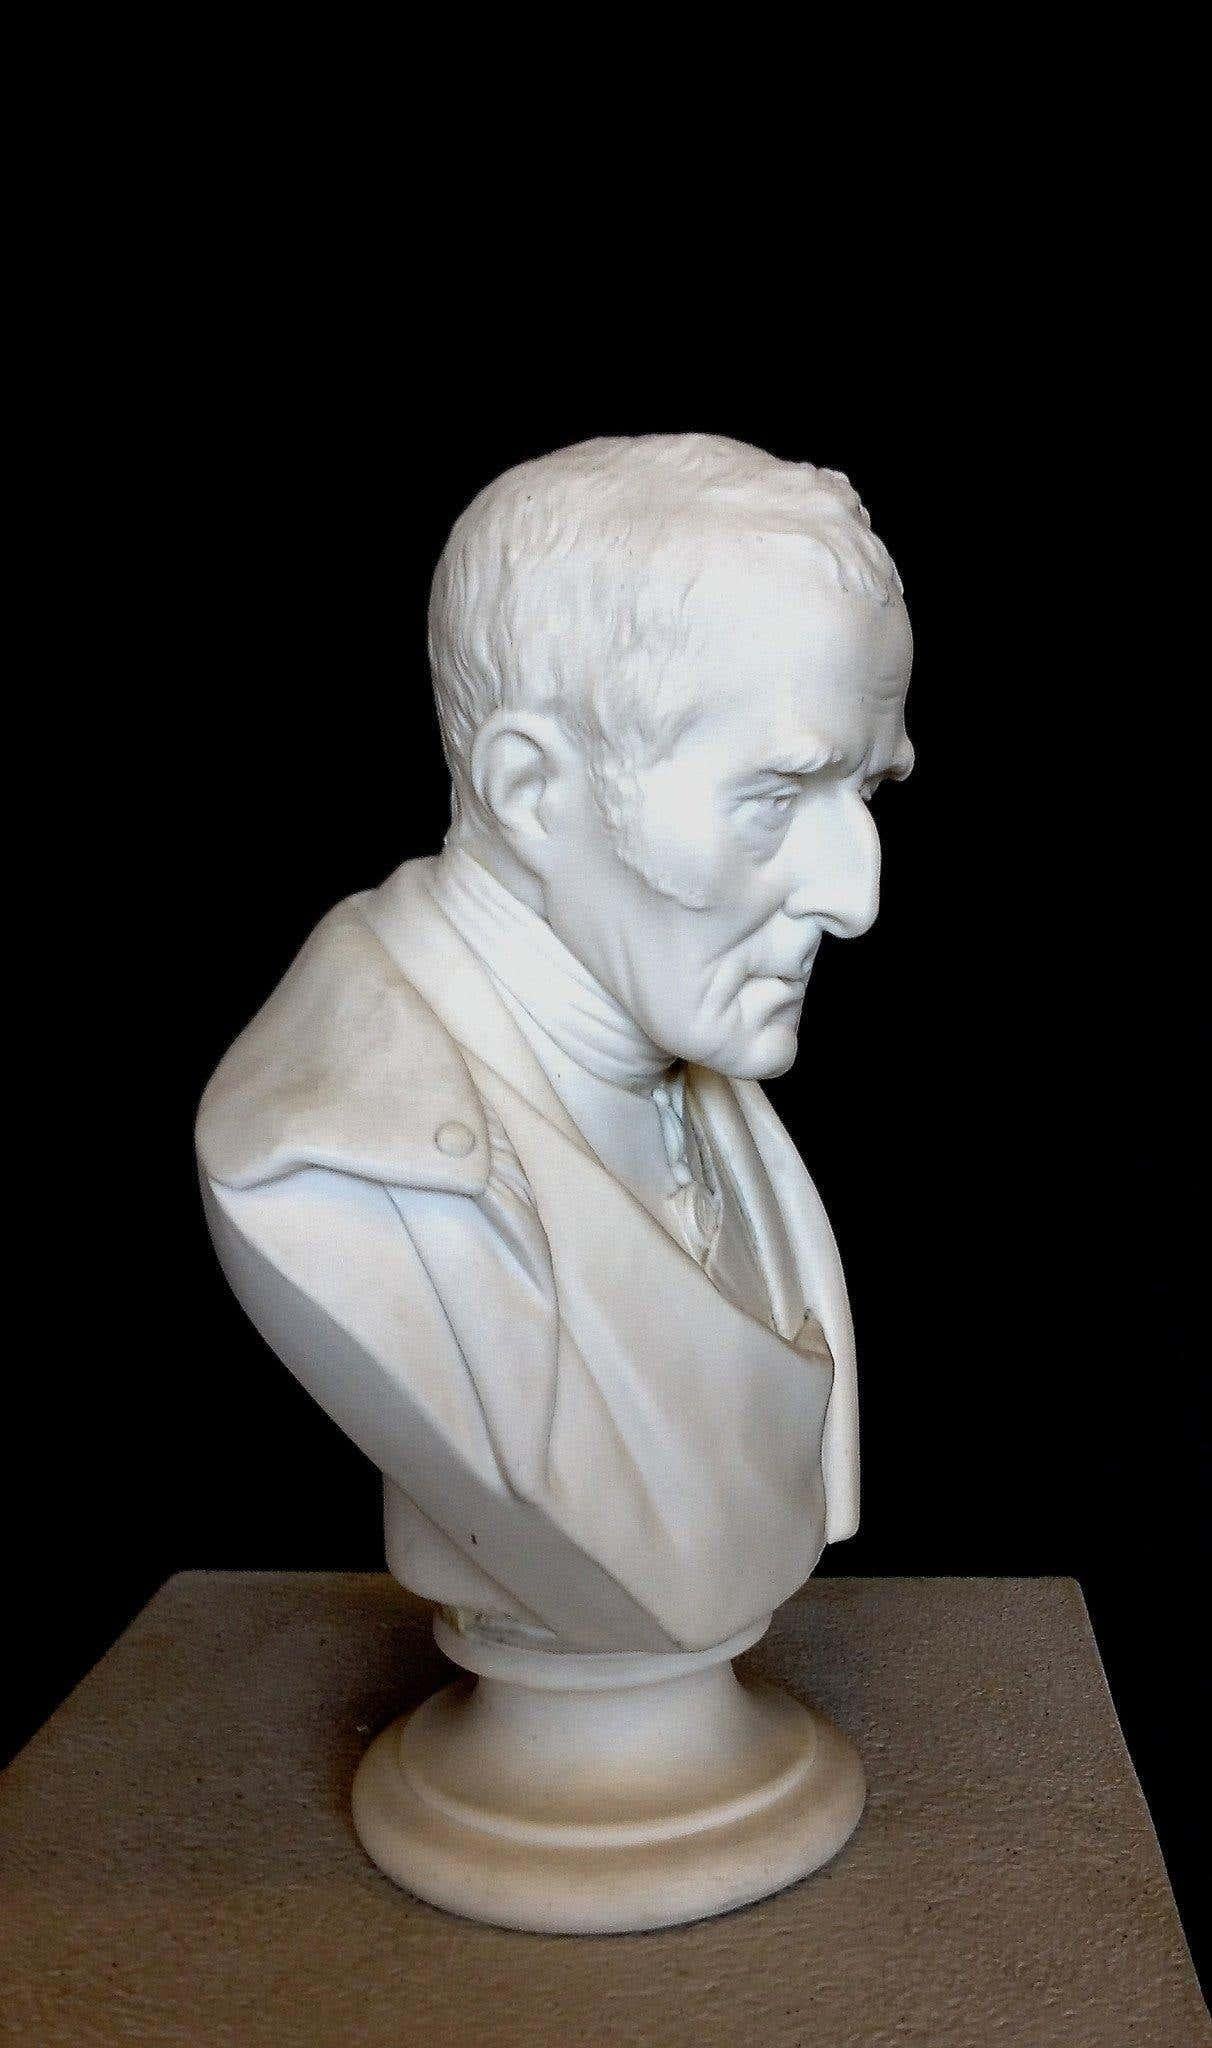 A gorgeous Duke of Wellington marble bust, 20th century.
Duke of Wellington, by Joseph Pitts, 1852.

A very finely detailed marble portrait Bust of Wellington, by one of the leading British Victorian portrait artists.

Pitts exhibited at the